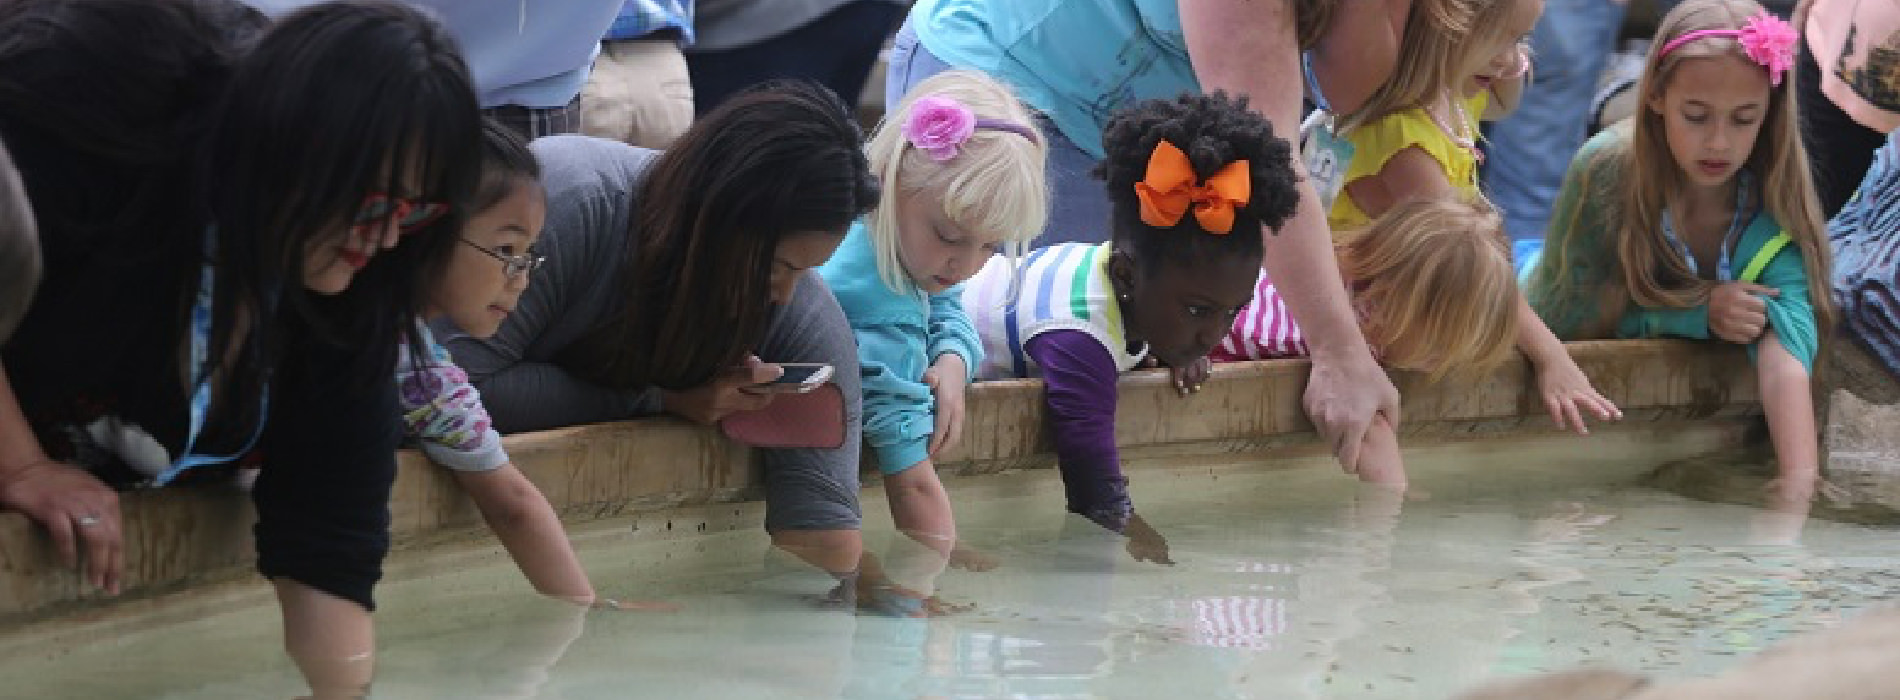 Young children reach into a shallow tank to touch marine life